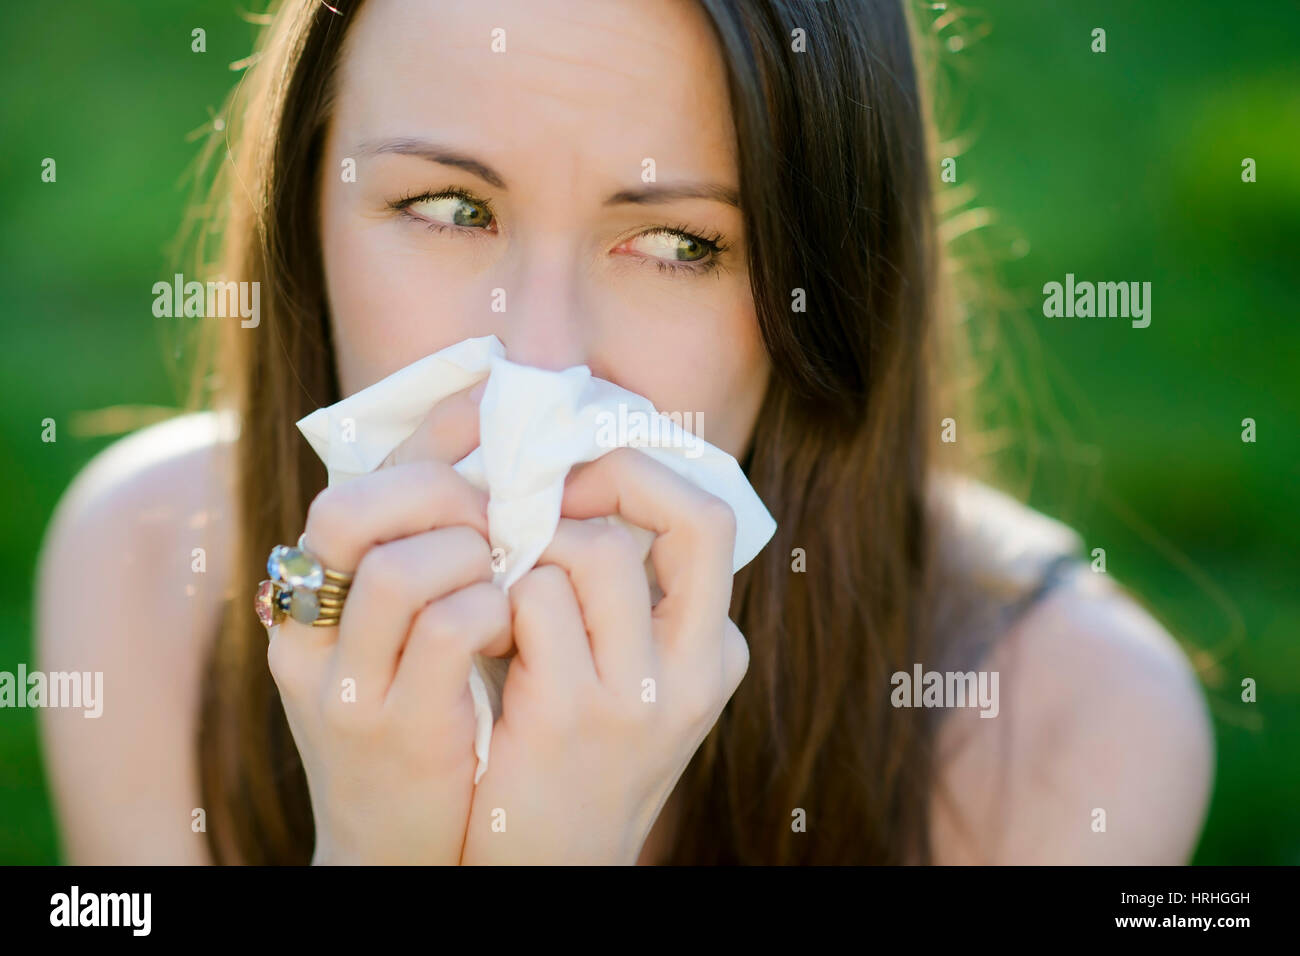 Junge Frau mit Pollenallergie - woman with pollen allergy in spring Stock Photo